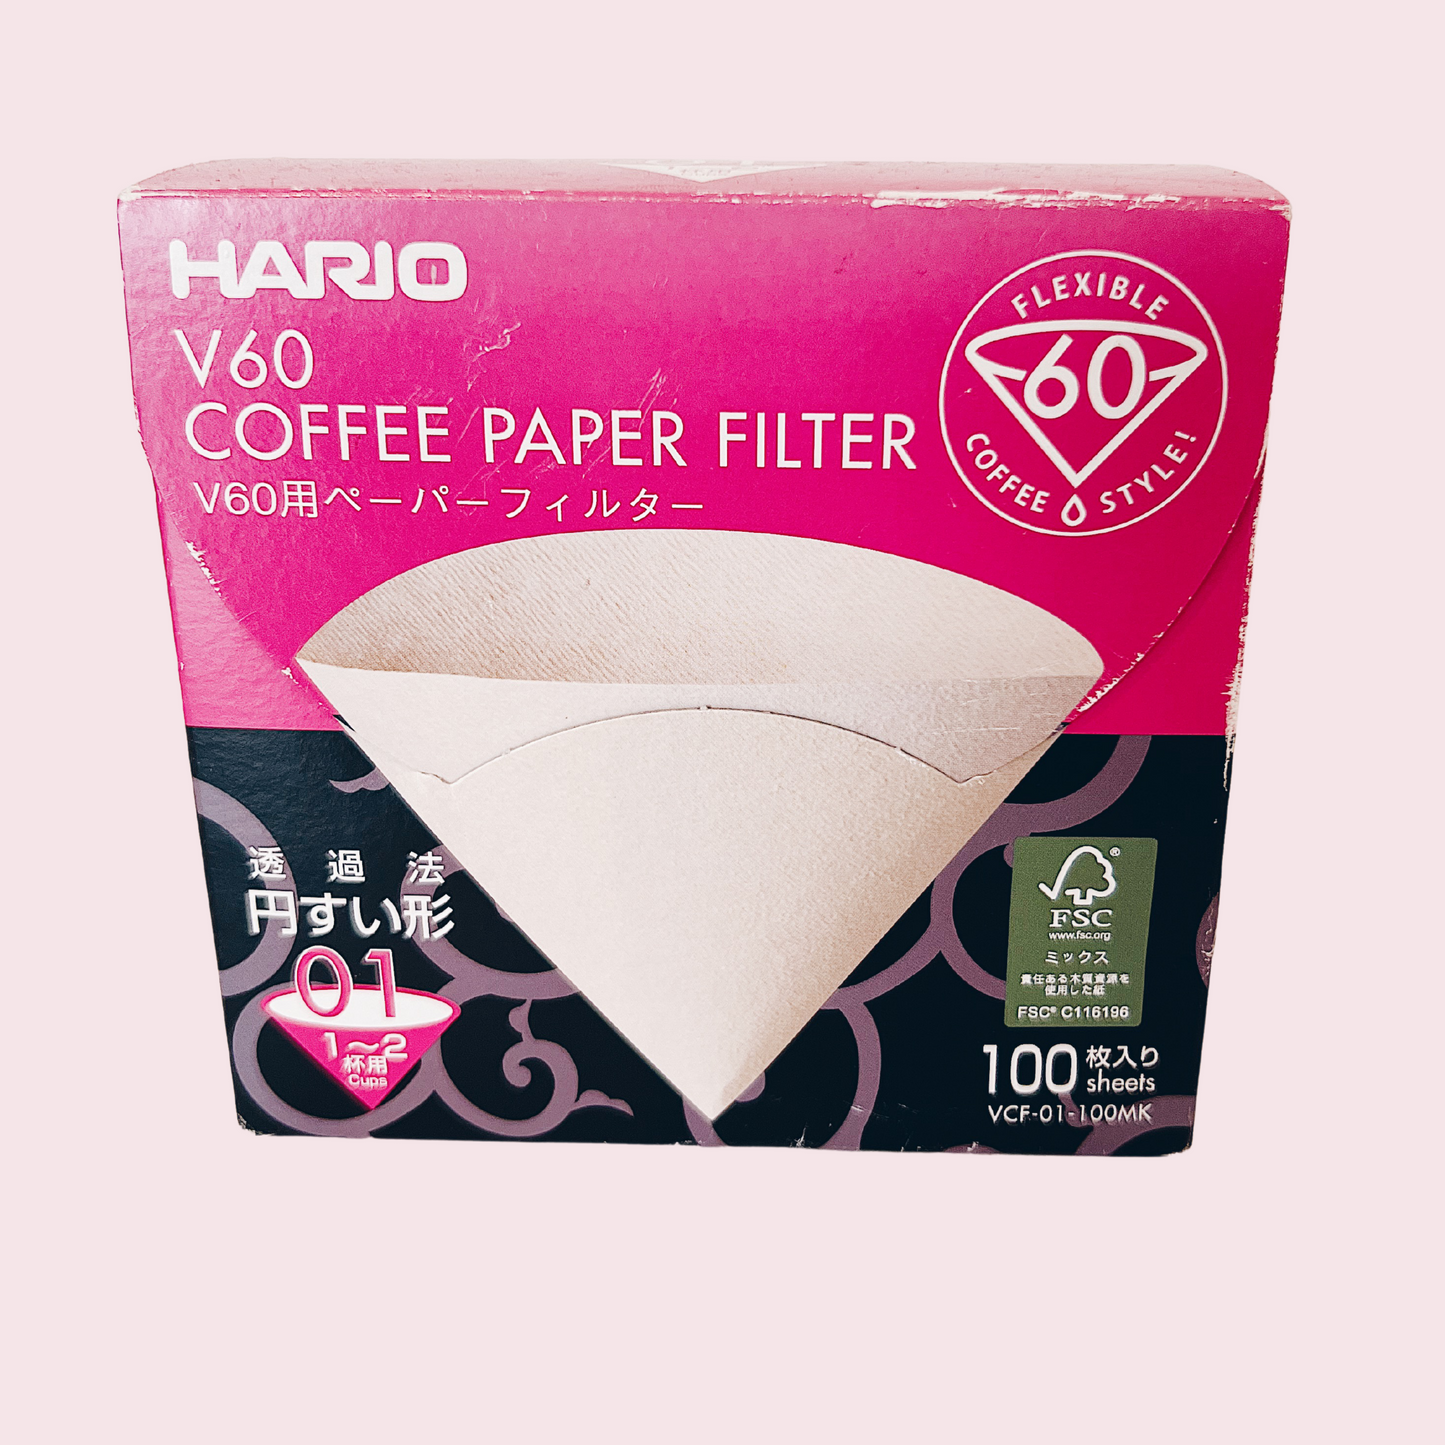 V60 Dripper & Filter Papers with Coffee